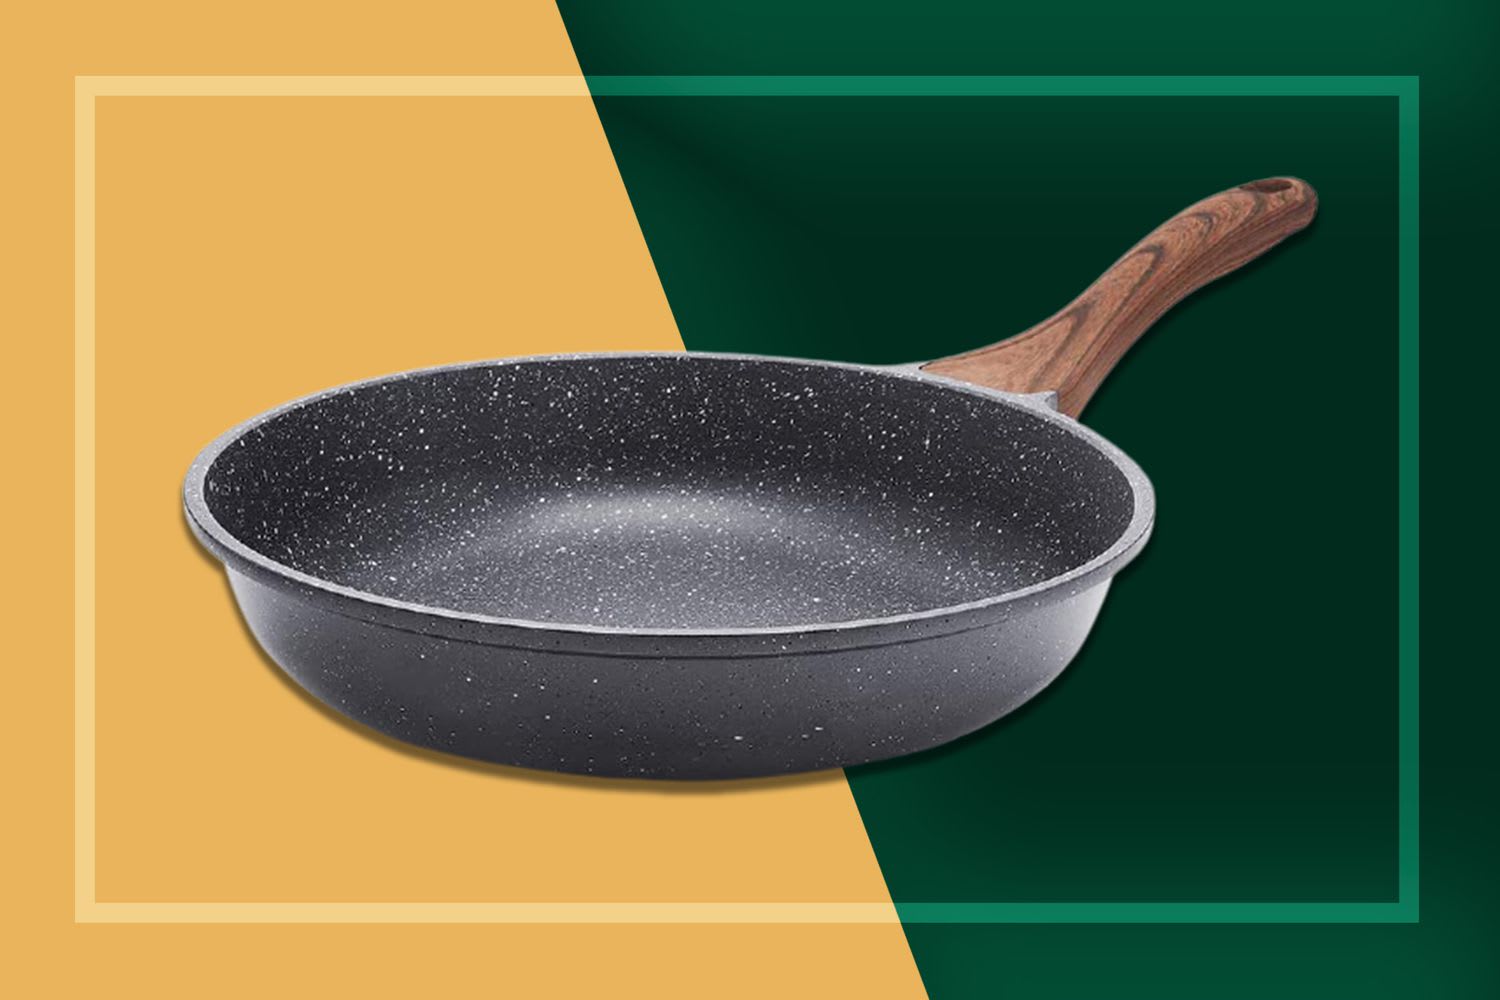 Amazon Shoppers Love How 'Nothing Sticks' to This Top-Rated Skillet—and It's 39% Off